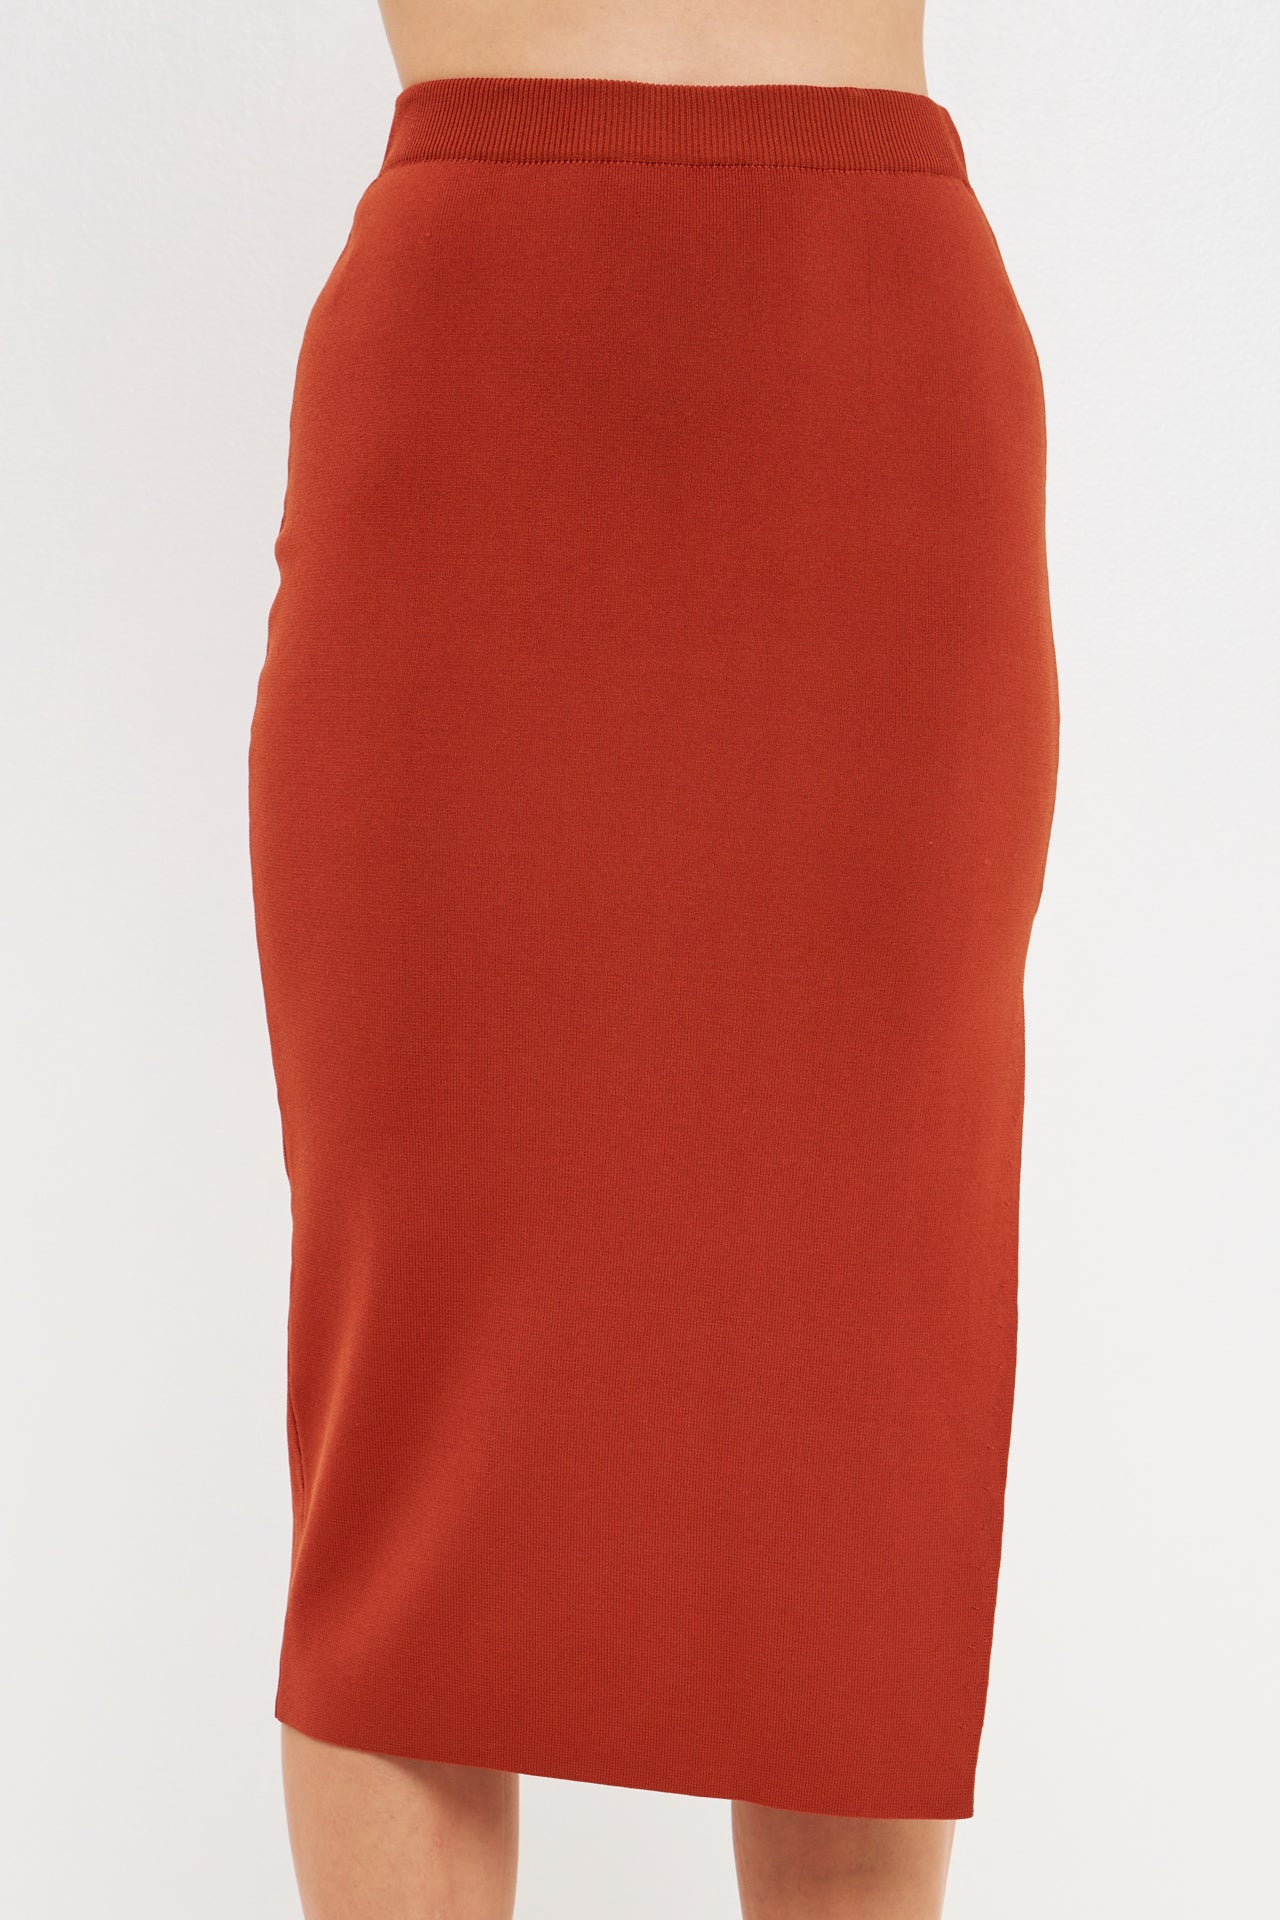 Endless Rose - Side Slit Detailed Knit Midi Skirt - Skirts in Women's Clothing available at endlessrose.com